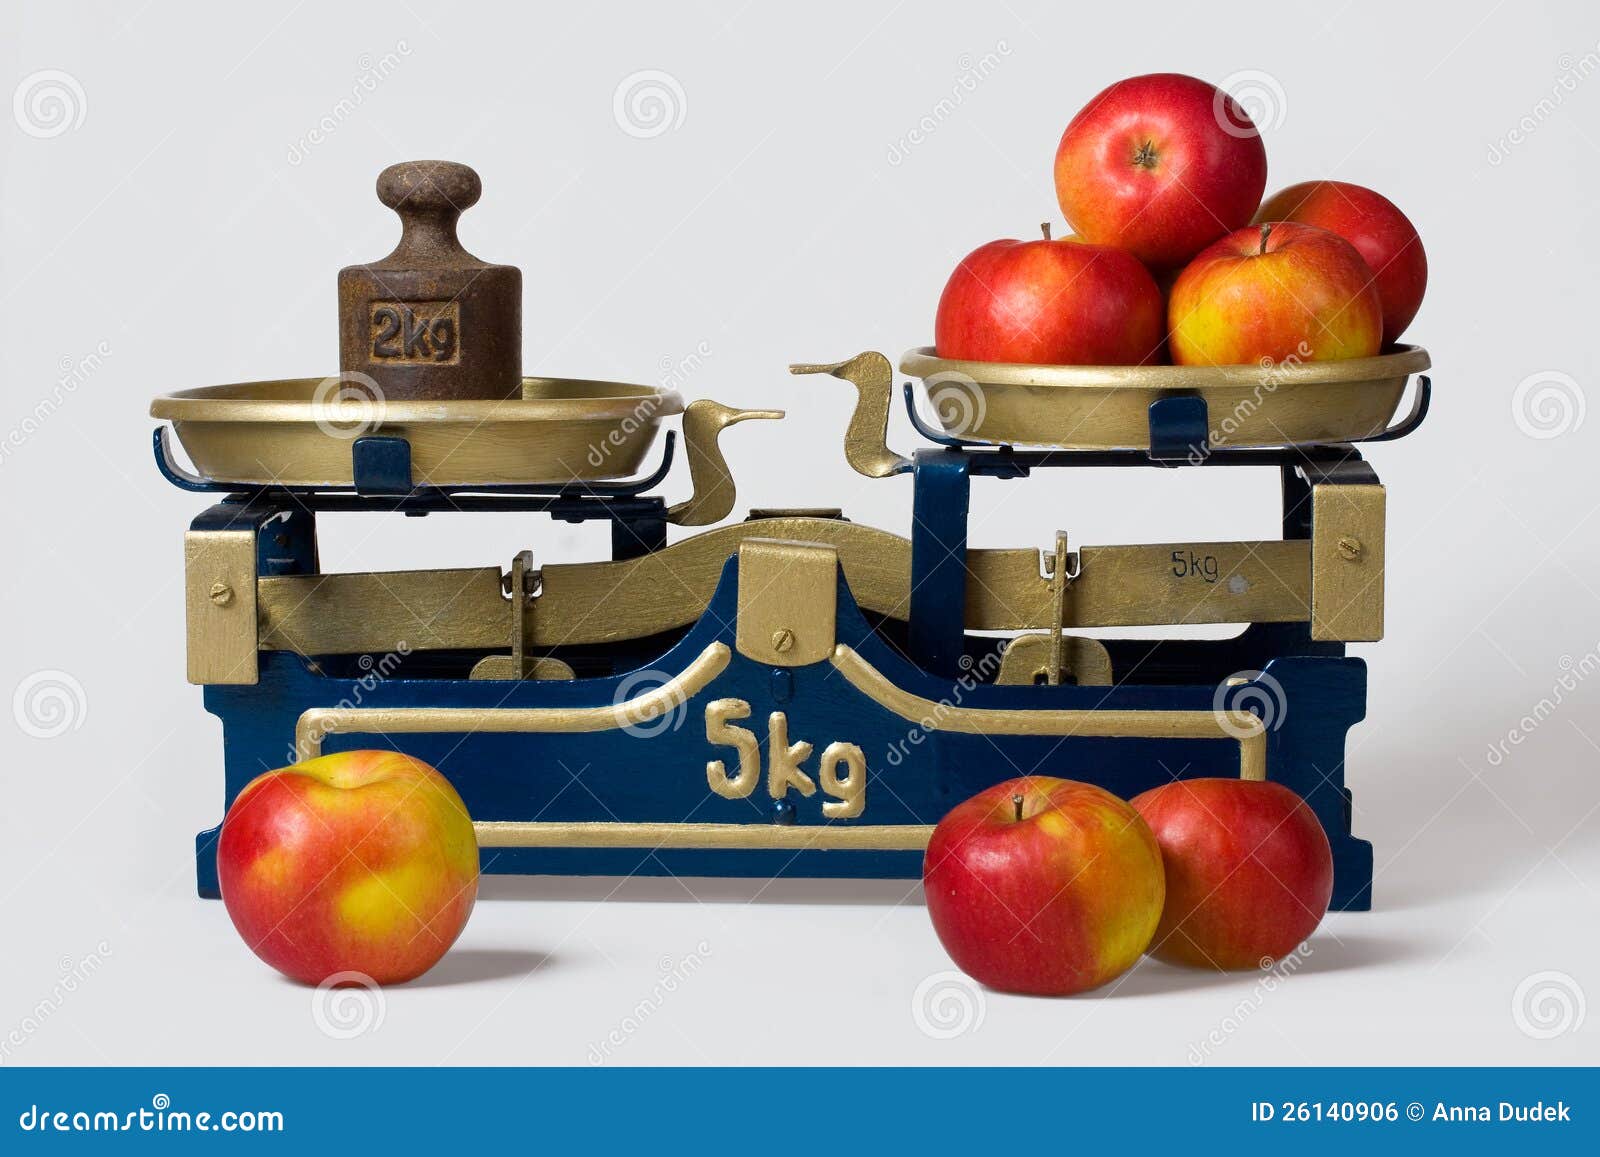 Apples on scales Stock Photo by Artem_ka